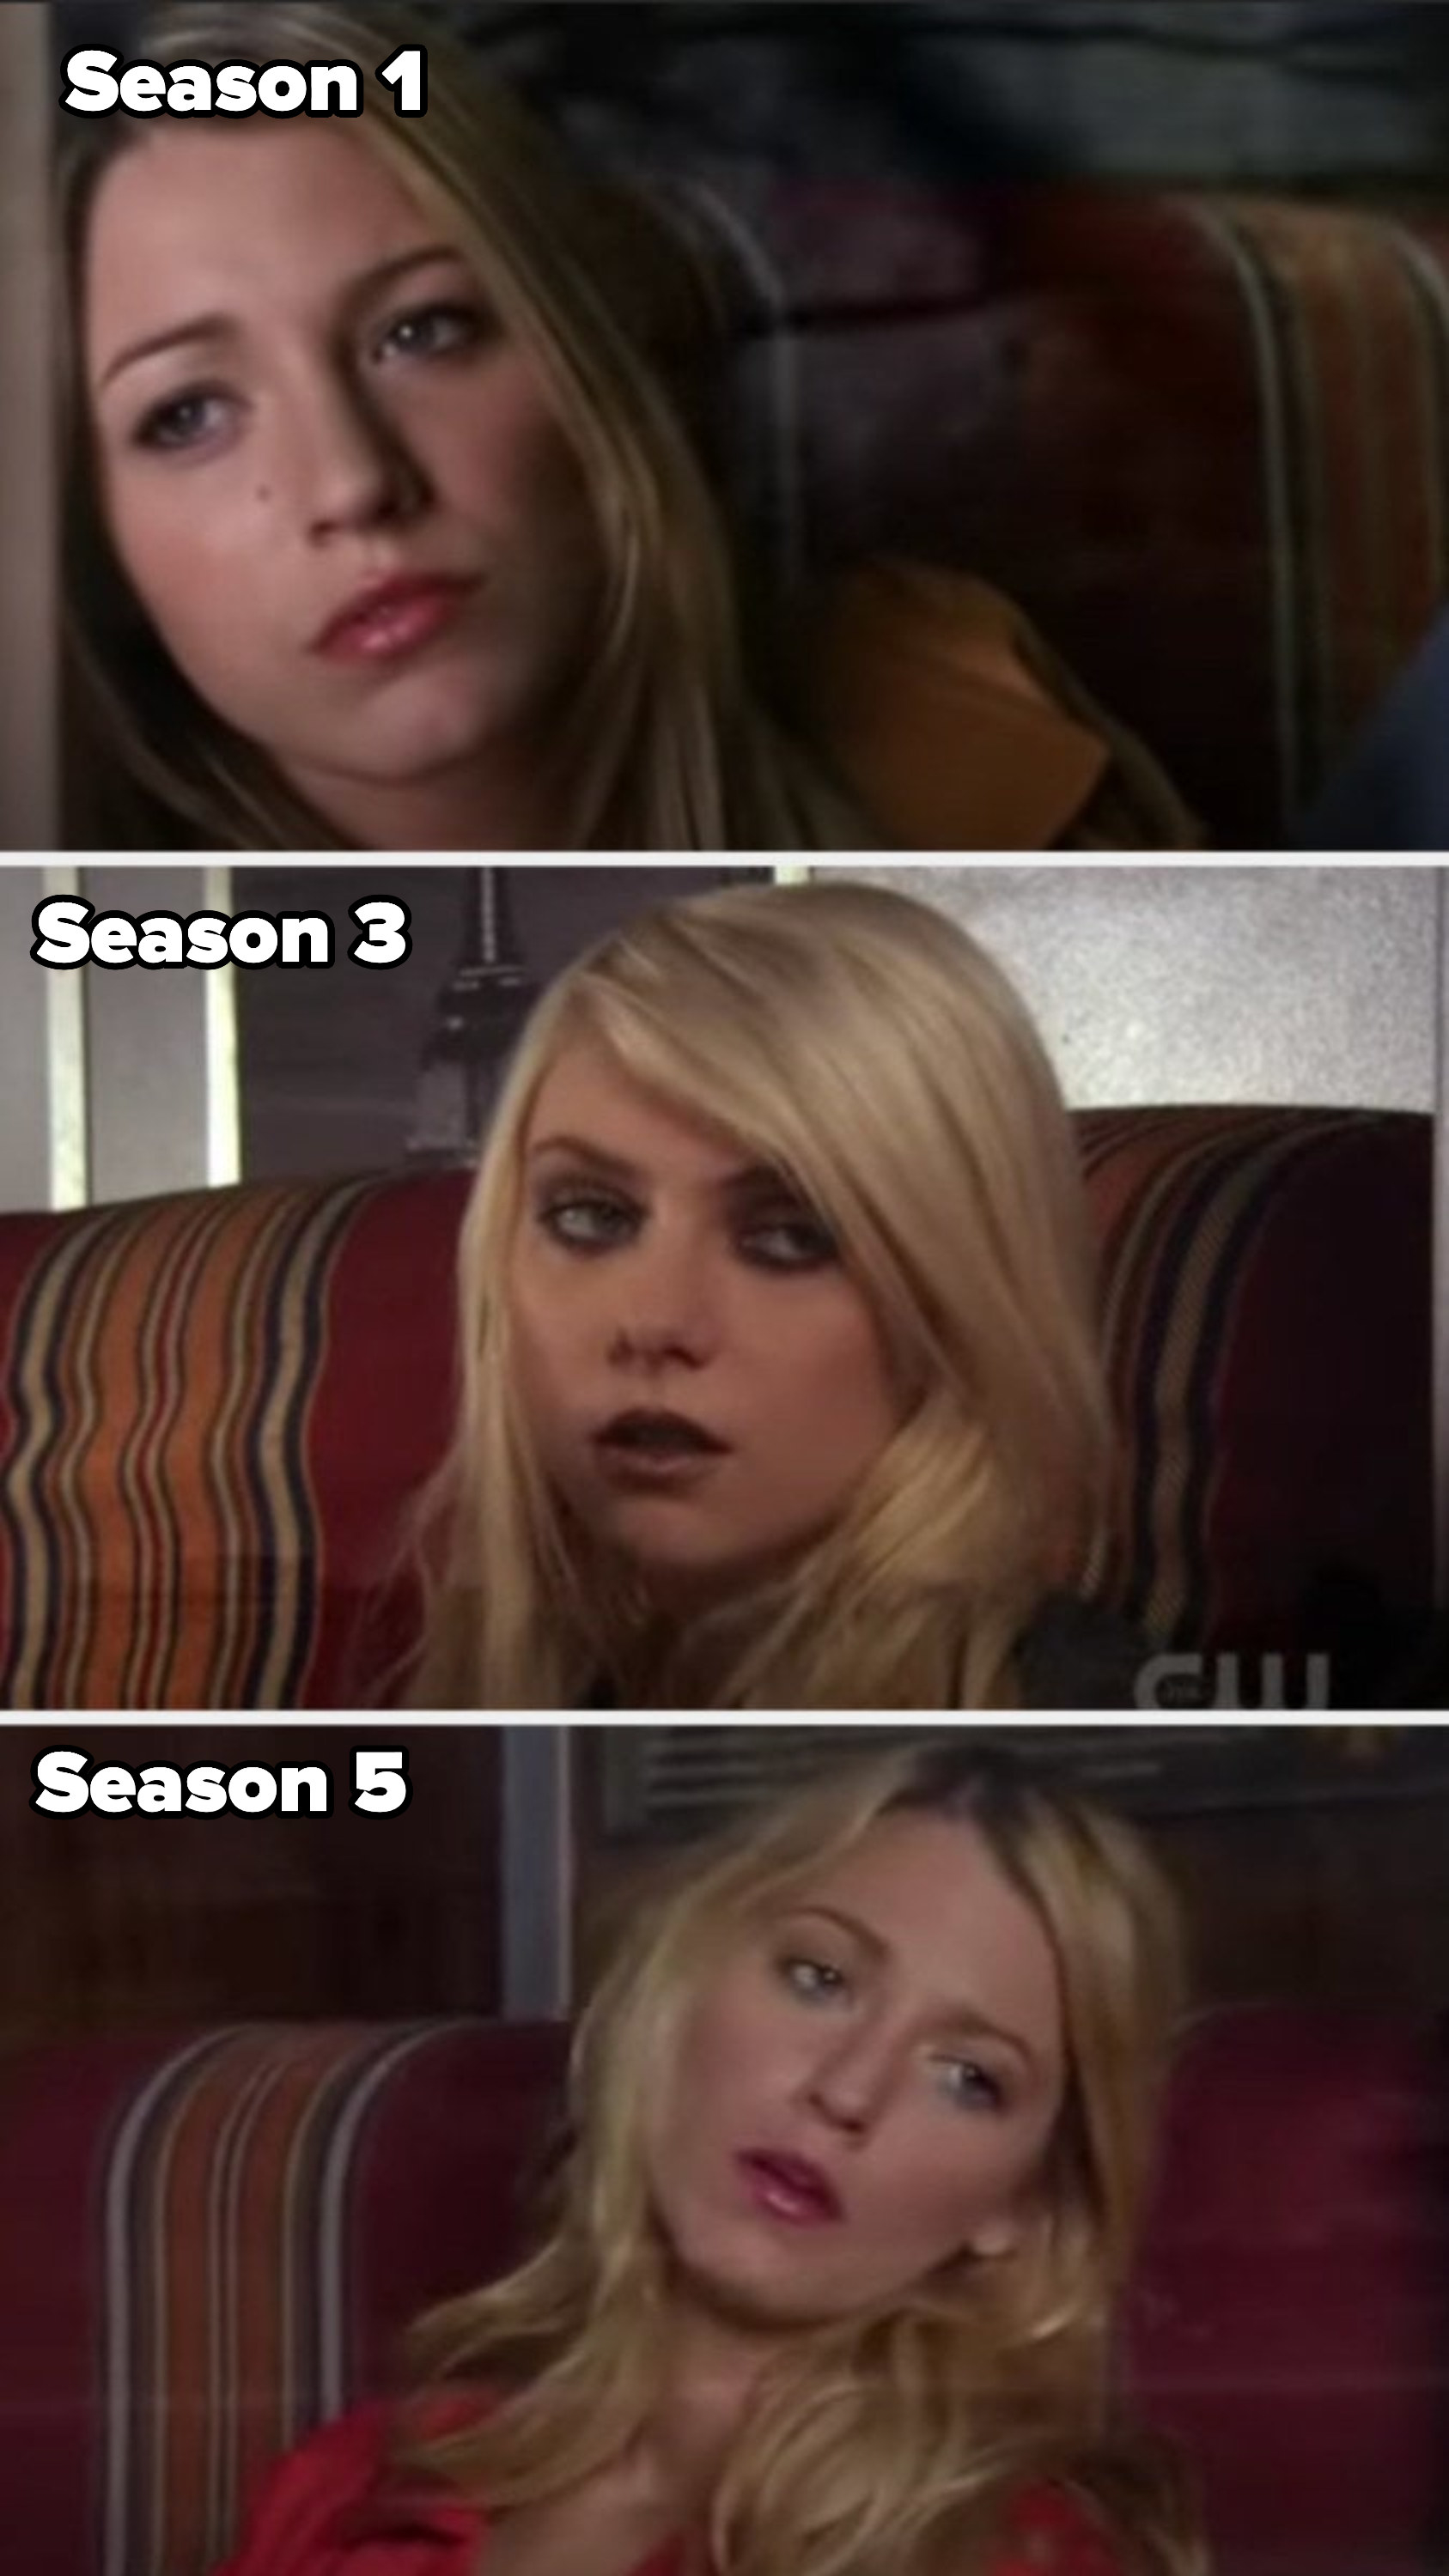 Serena coming into town in Season 1, Jenny leaving town in Season 3, and Serena leaving town in Season 3, all through the window on the train